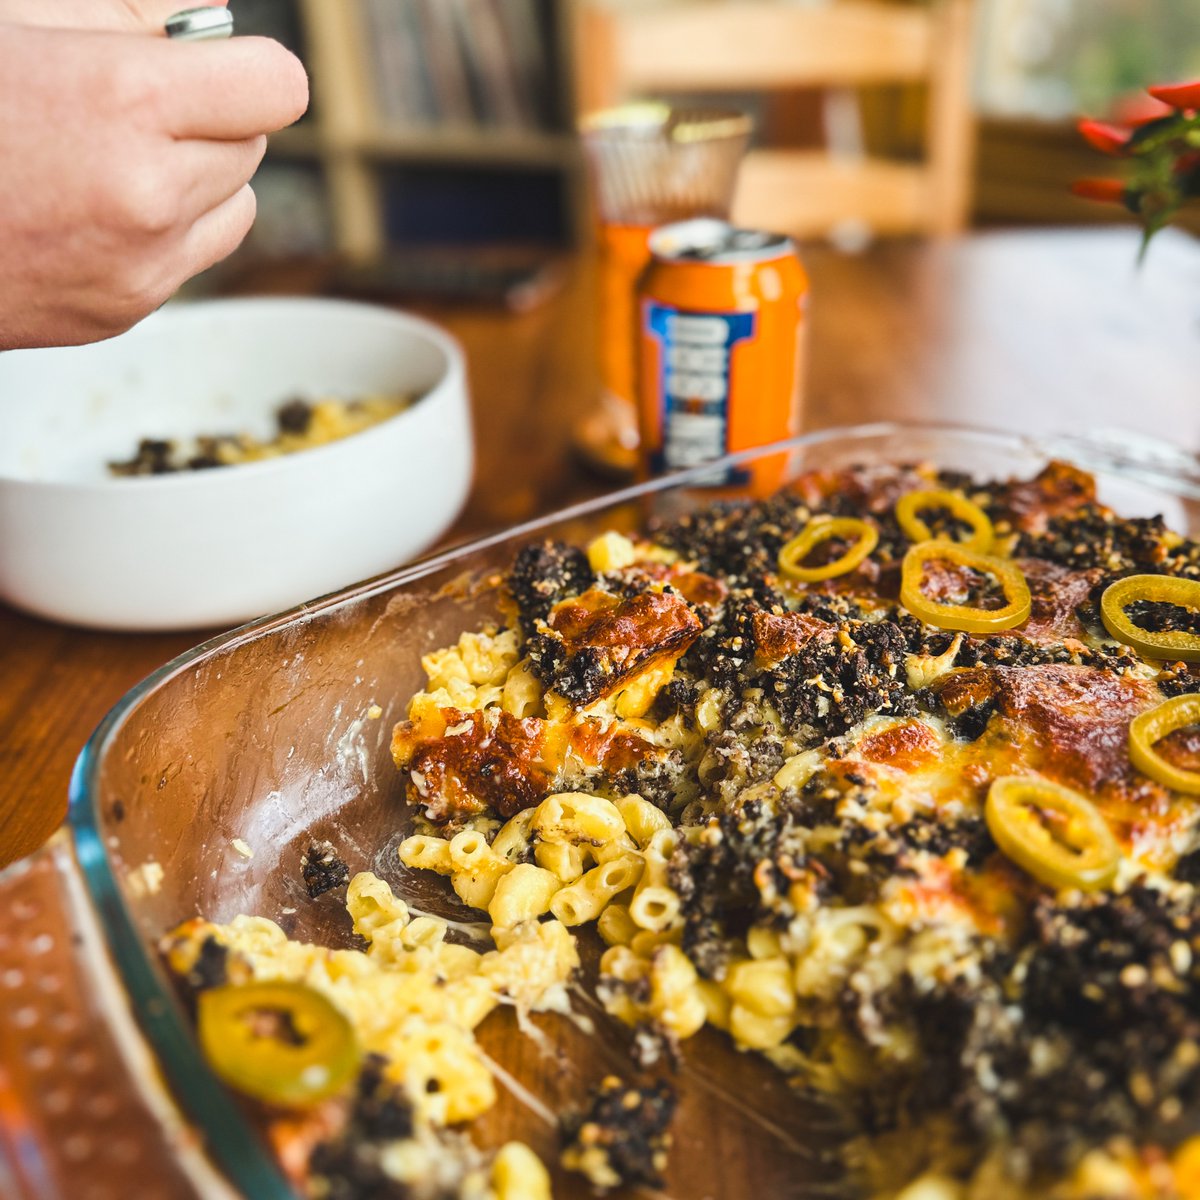 Here’s a Burns supper worthy of a poetic tribute: Haggis loaded Mac N’ Cheese with BRU pickled jalapeño by King Of Feasts. Head to our Instagram for more Burns’ Recipes! #BurnsNight IG: @KingOfFeasts